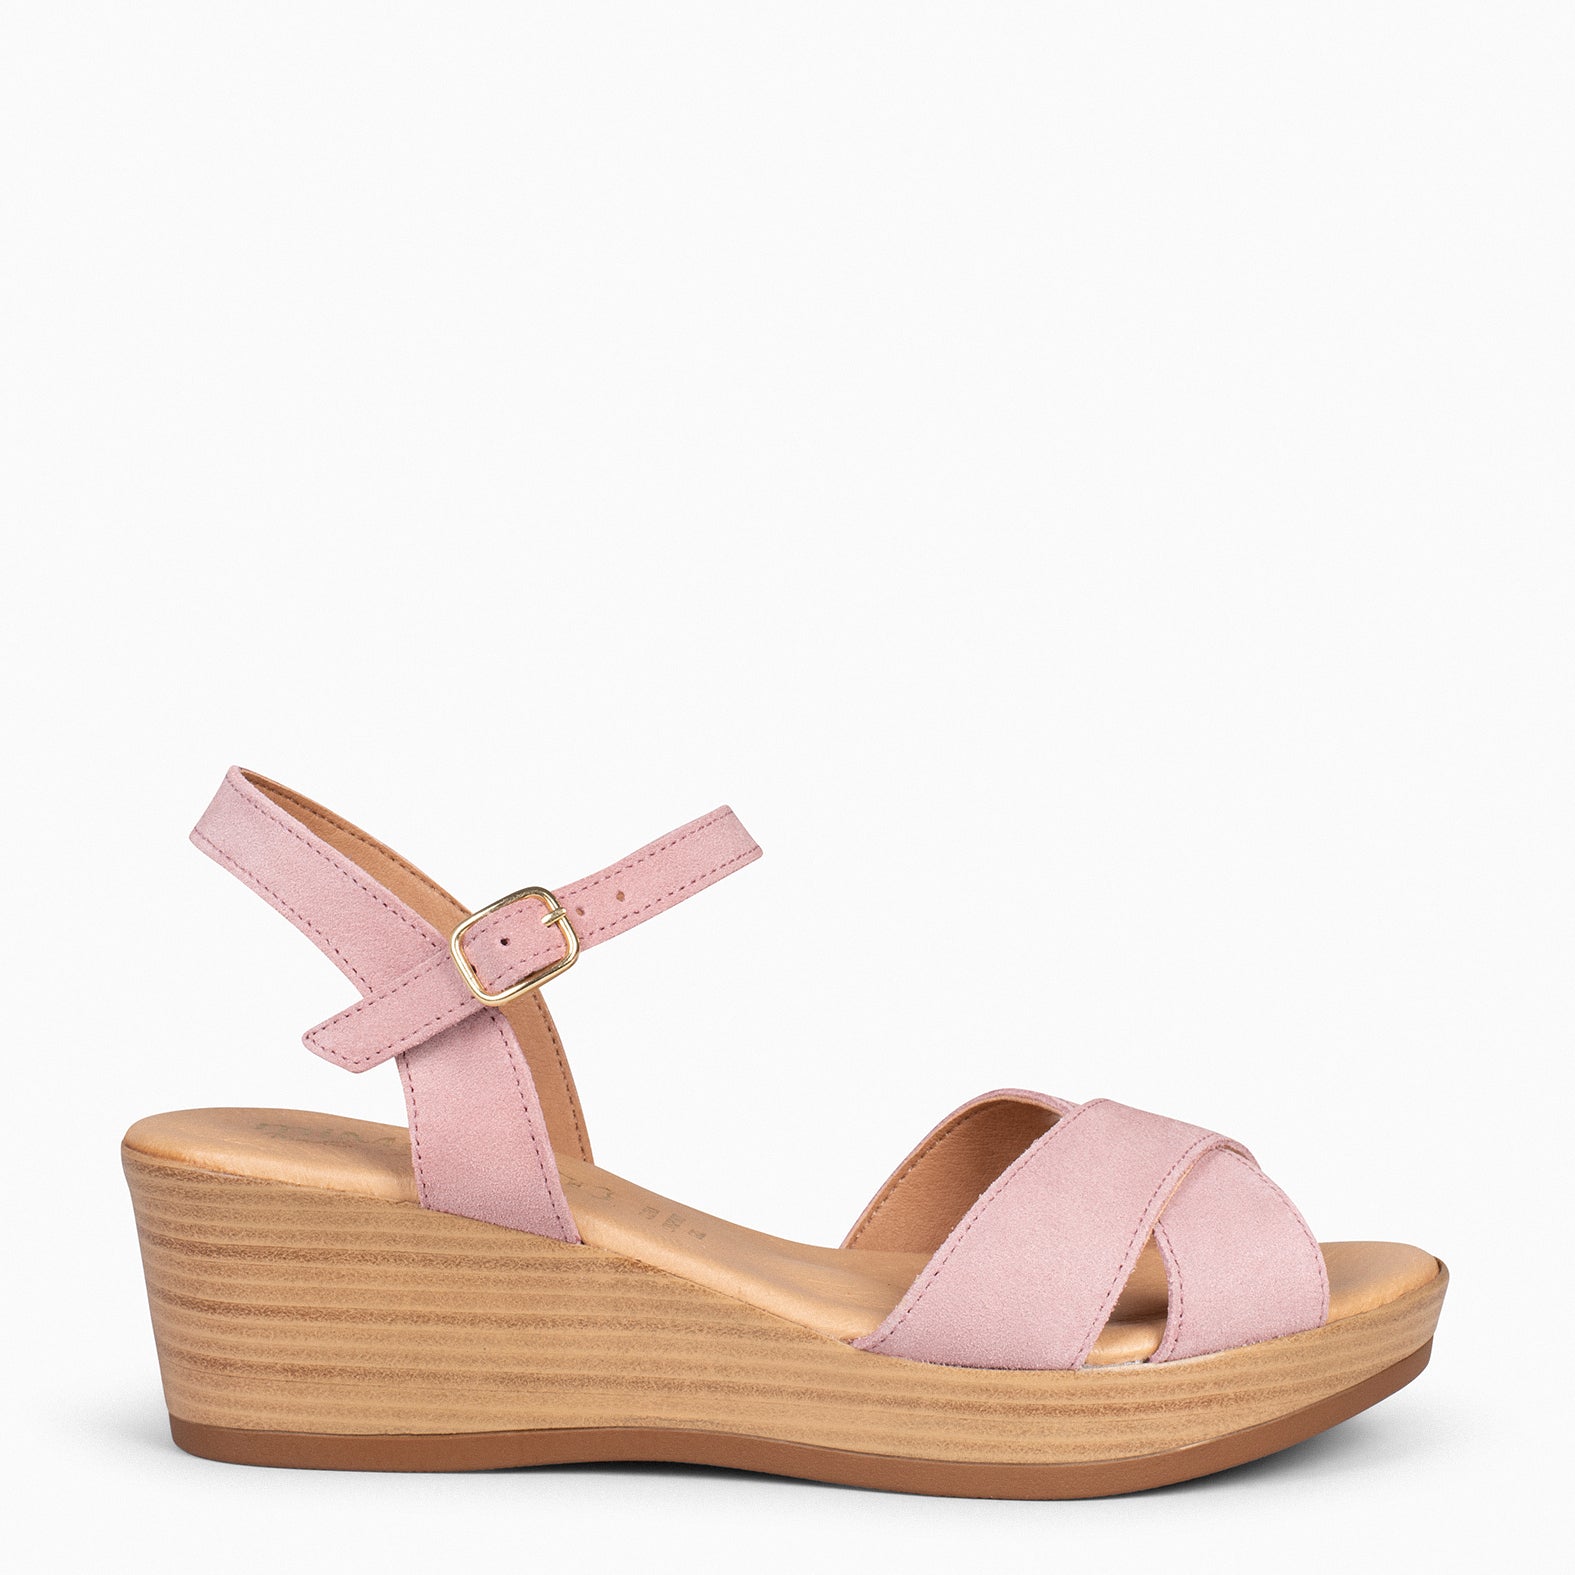 MAR – NUDE WEDGE SHOES